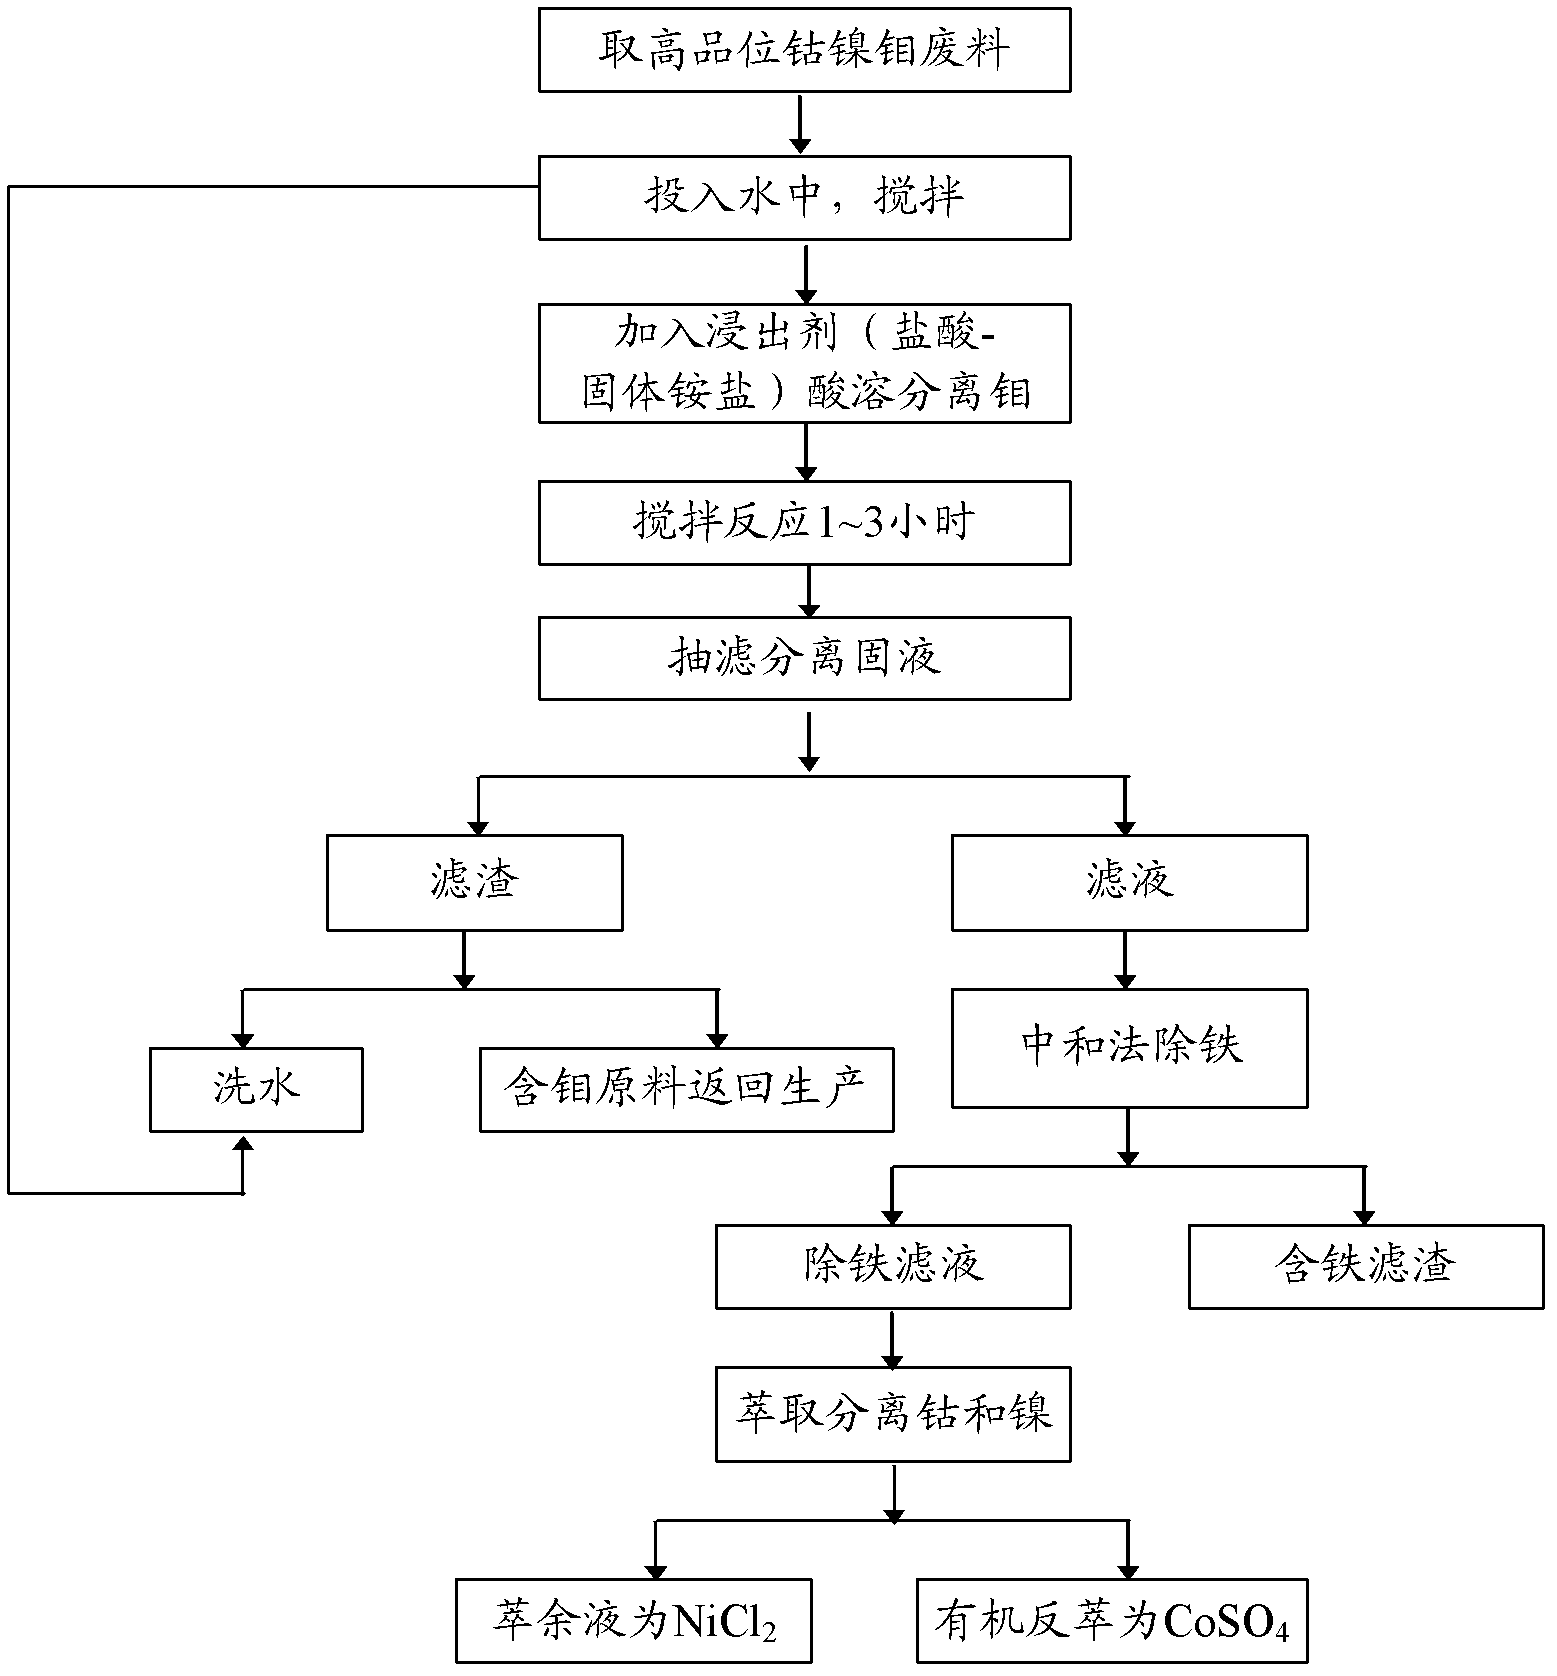 Method for selective leaching separation of cobalt, nickel and molybdenum from high grade cobalt-nickel-molybdenum waste material